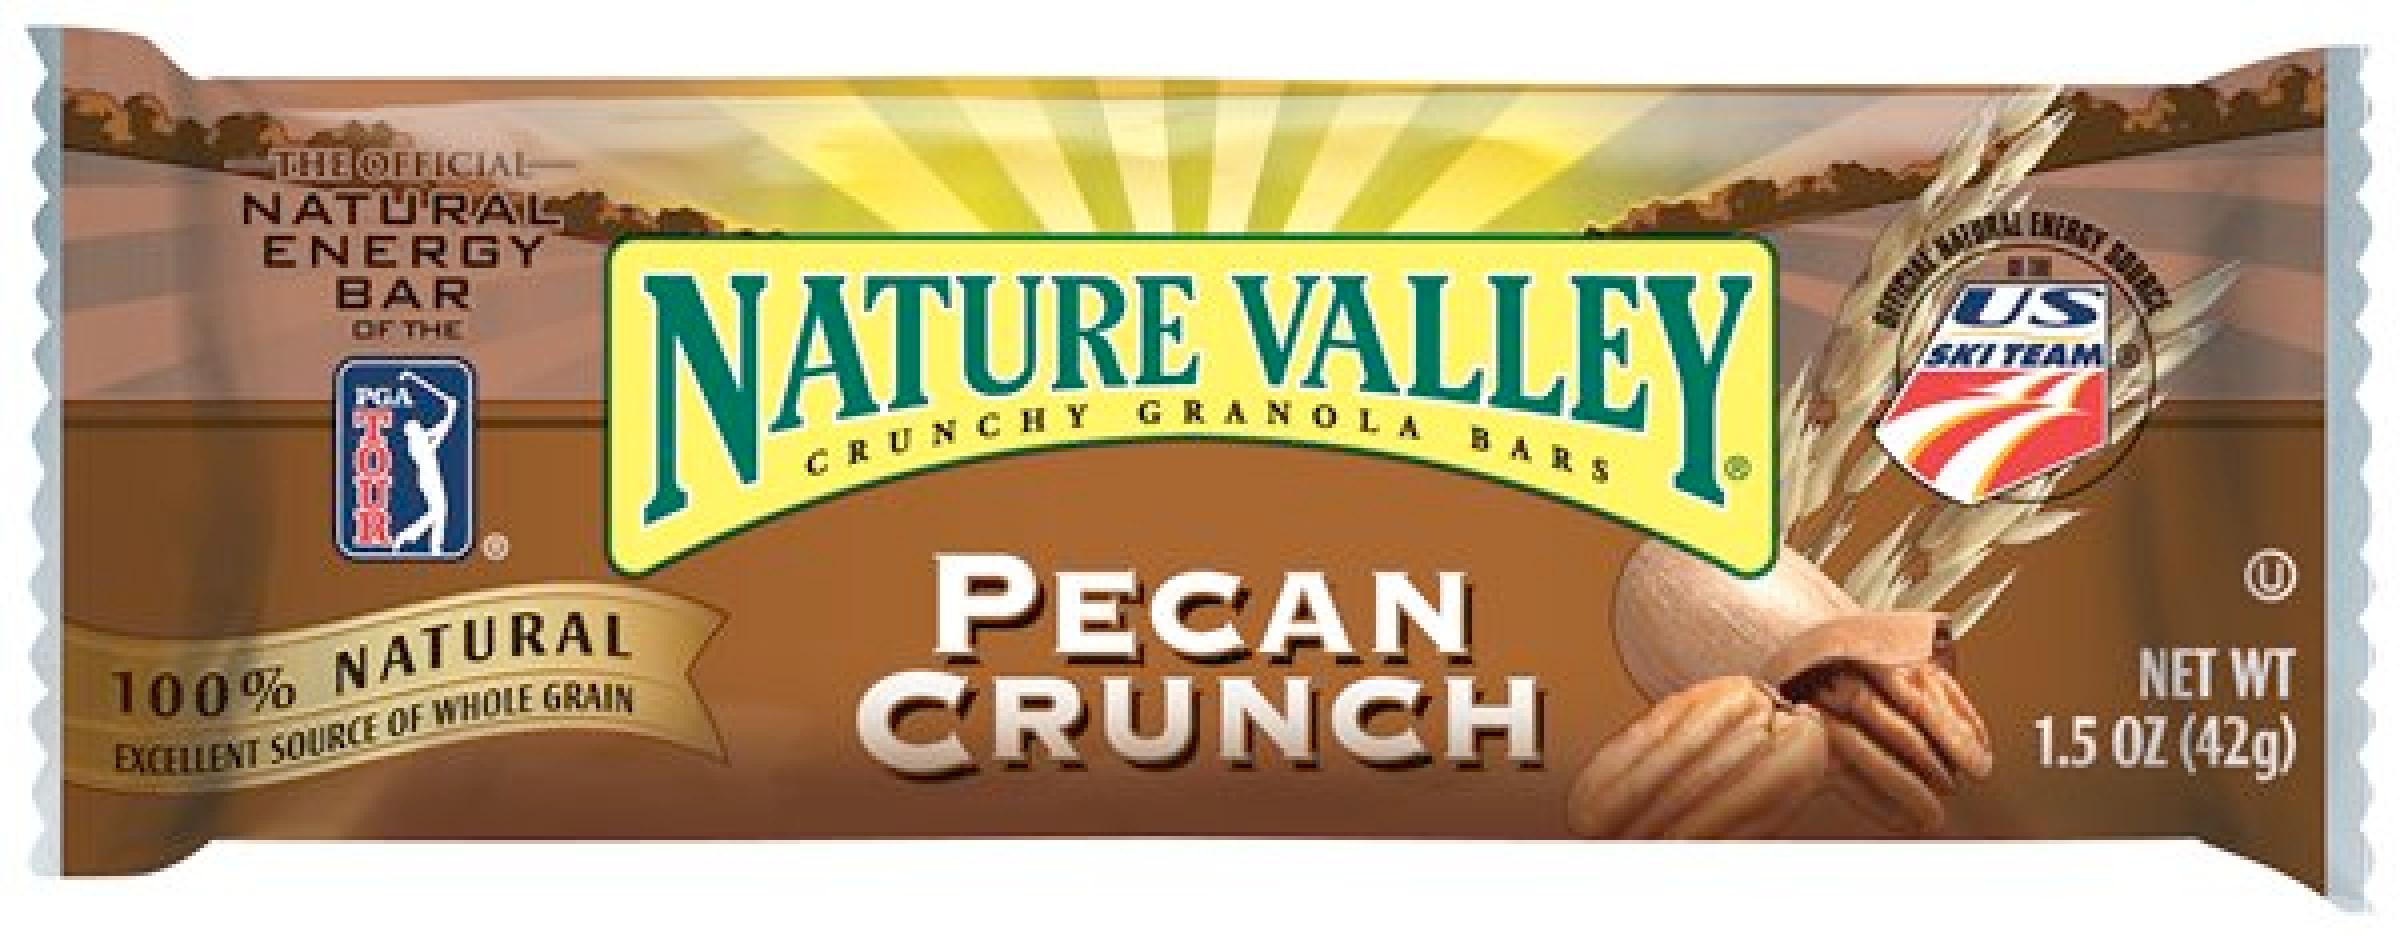  NATURE VALLEY